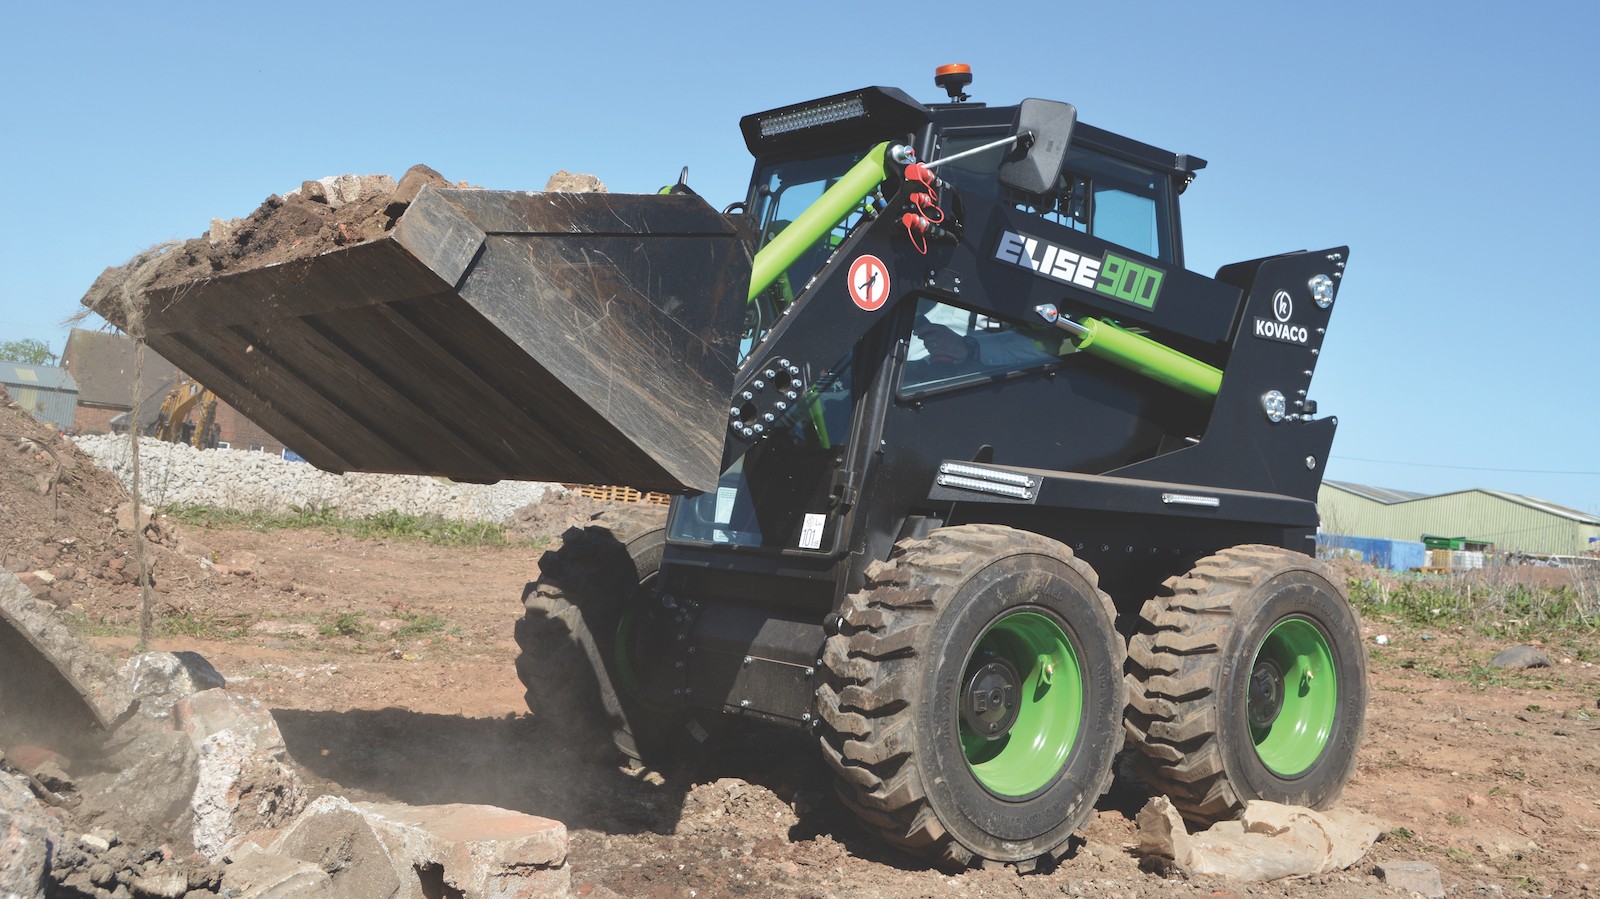 New electric skid steer from Koveco